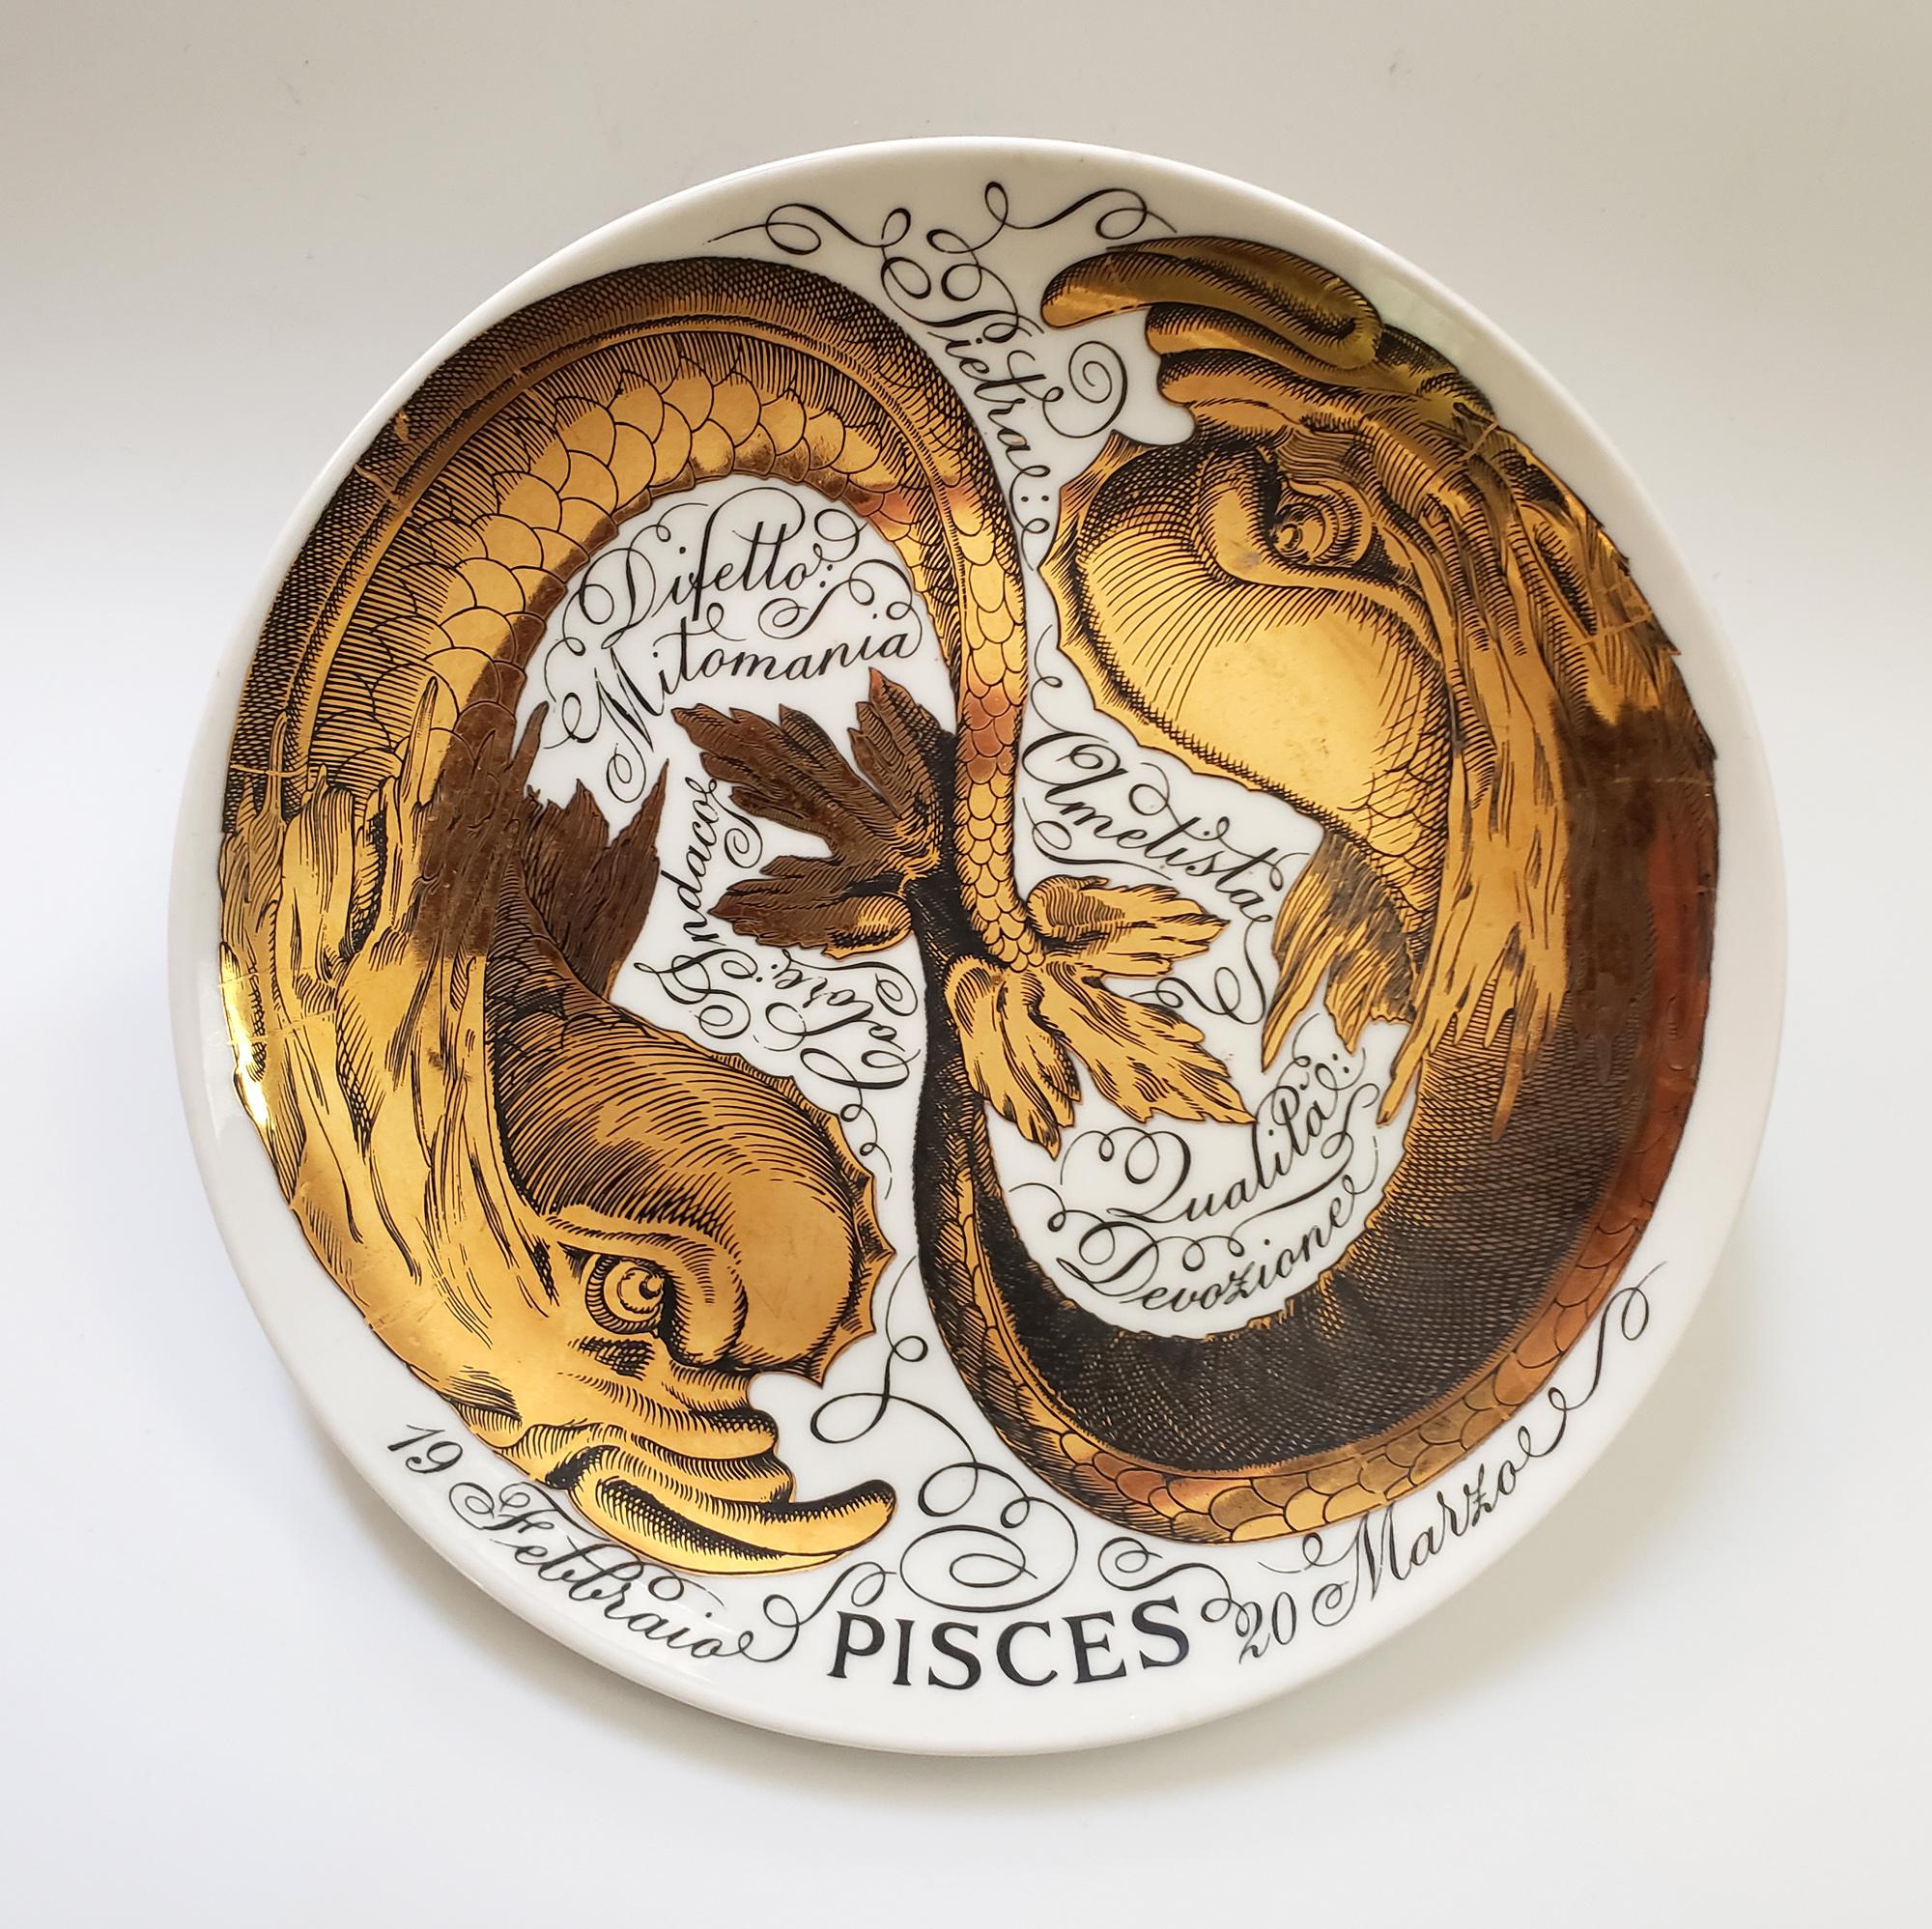 Vintage Piero Fornasetti Porcelain Zodiac Plate, 
Pisces, 
Astrali Pattern,
Made for Corisia, 
Dated 1971, No 8

The plate for the sign PISCES is dated 1971 and is numbered #8. The plate depicts the Astrological Zodiac sign Pisces which is